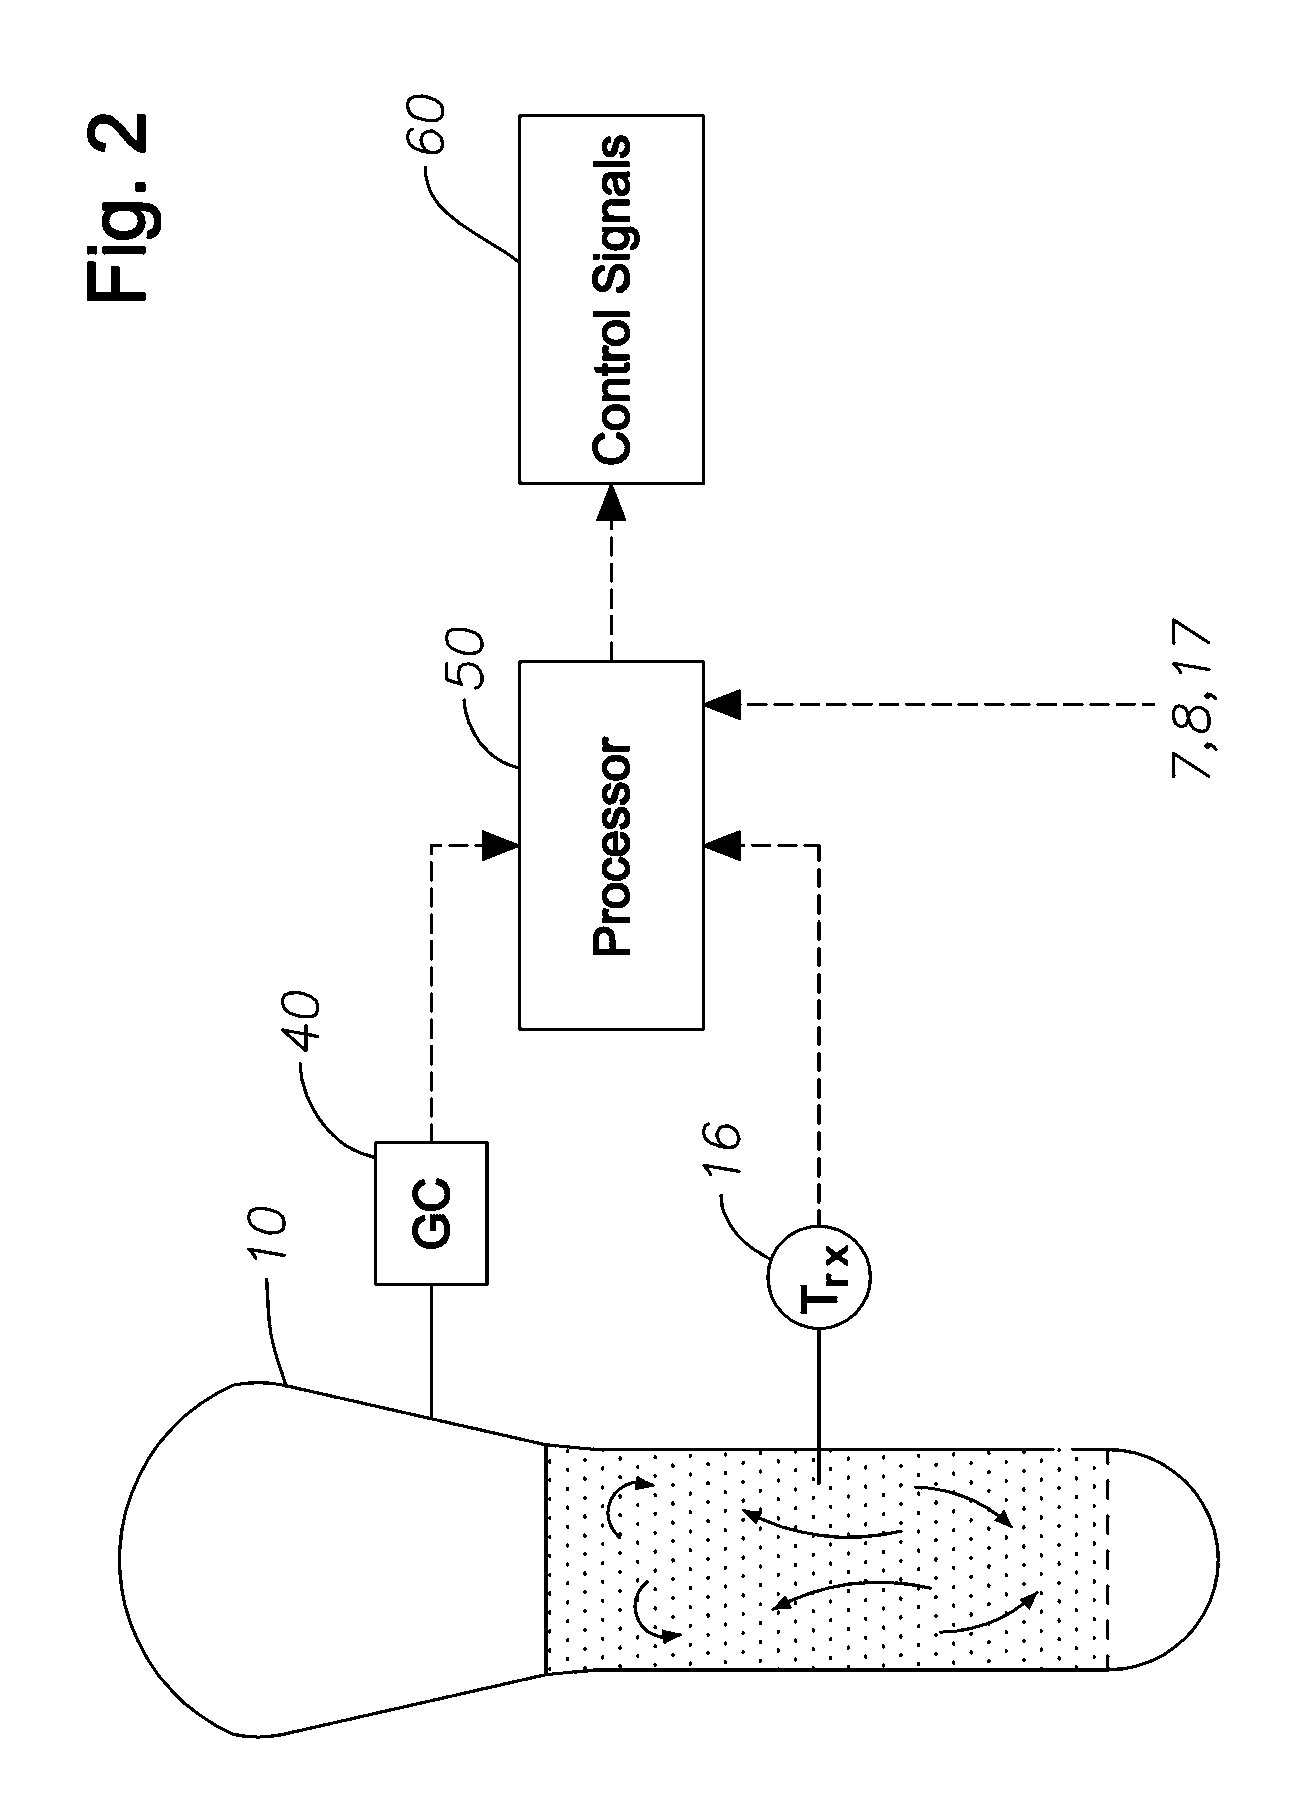 Method for reducing and/or preventing production of excessively low density polymer product during polymerization transitions